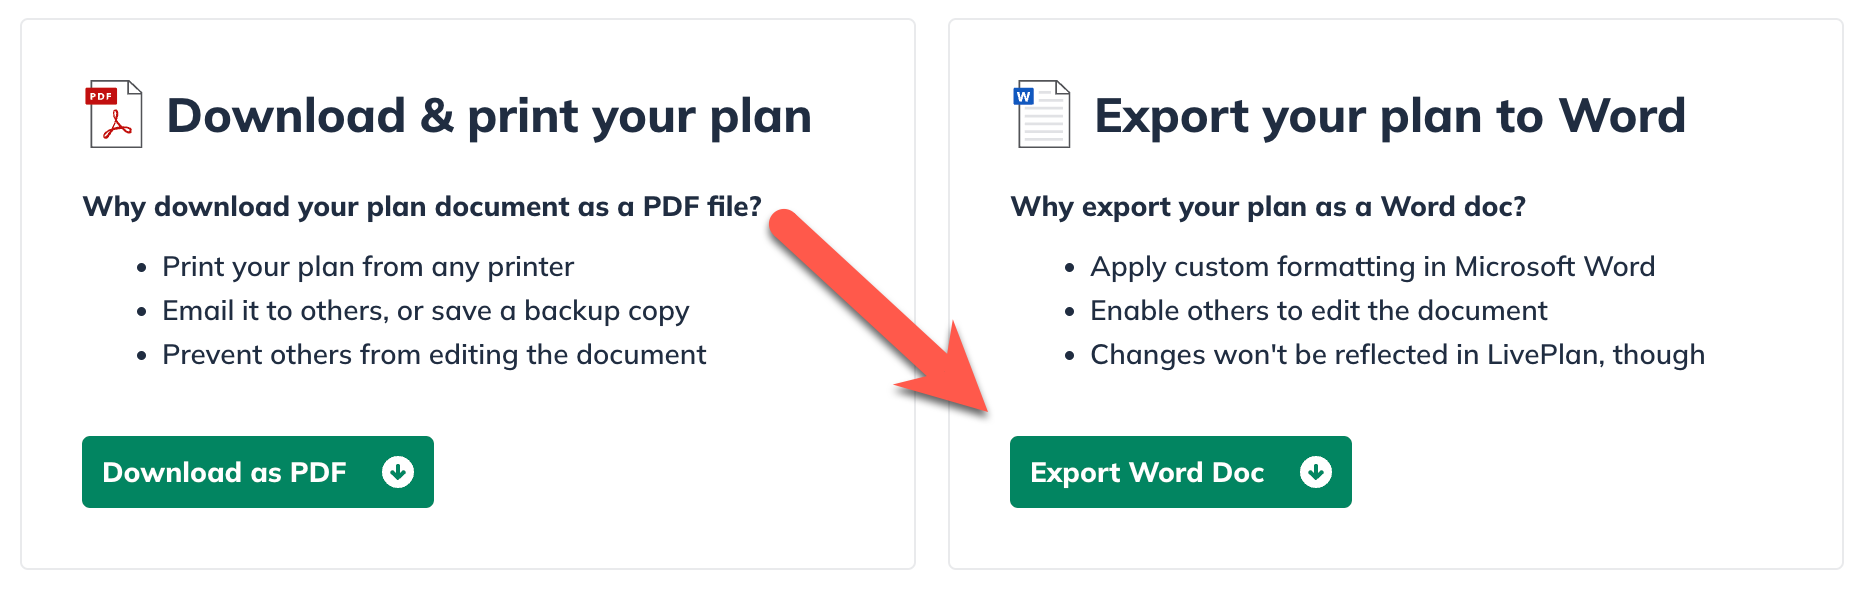 arrow pointing to export word doc button.png